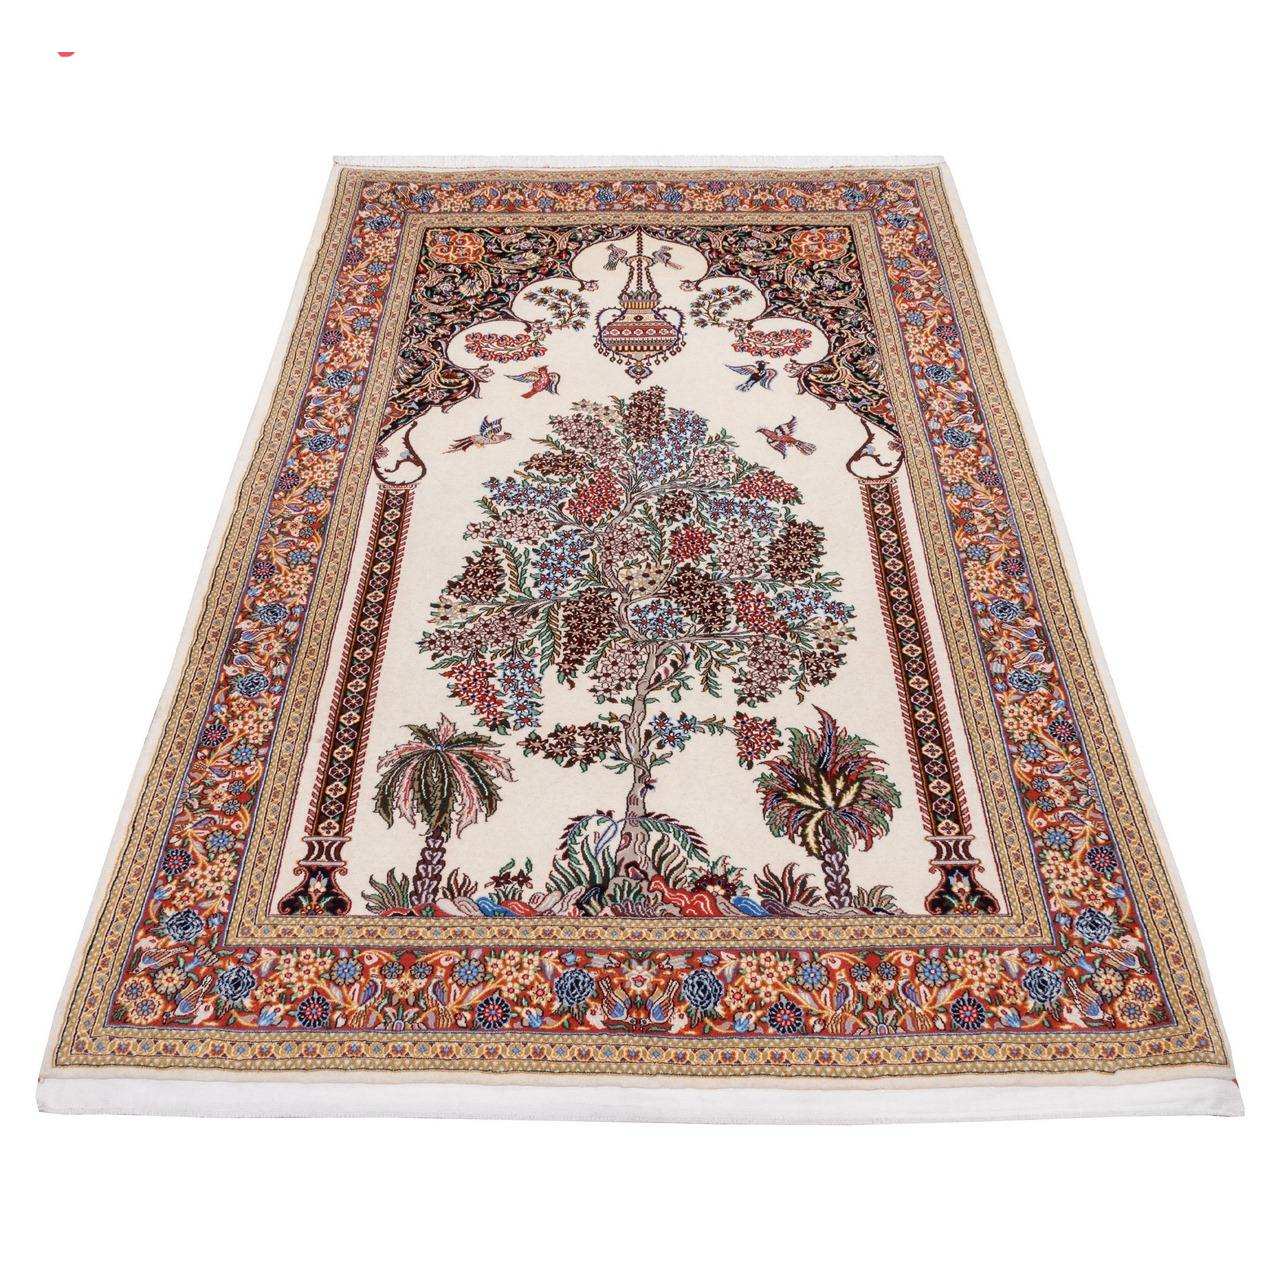 Two and a half meter handmade carpet by Persia, code 183030